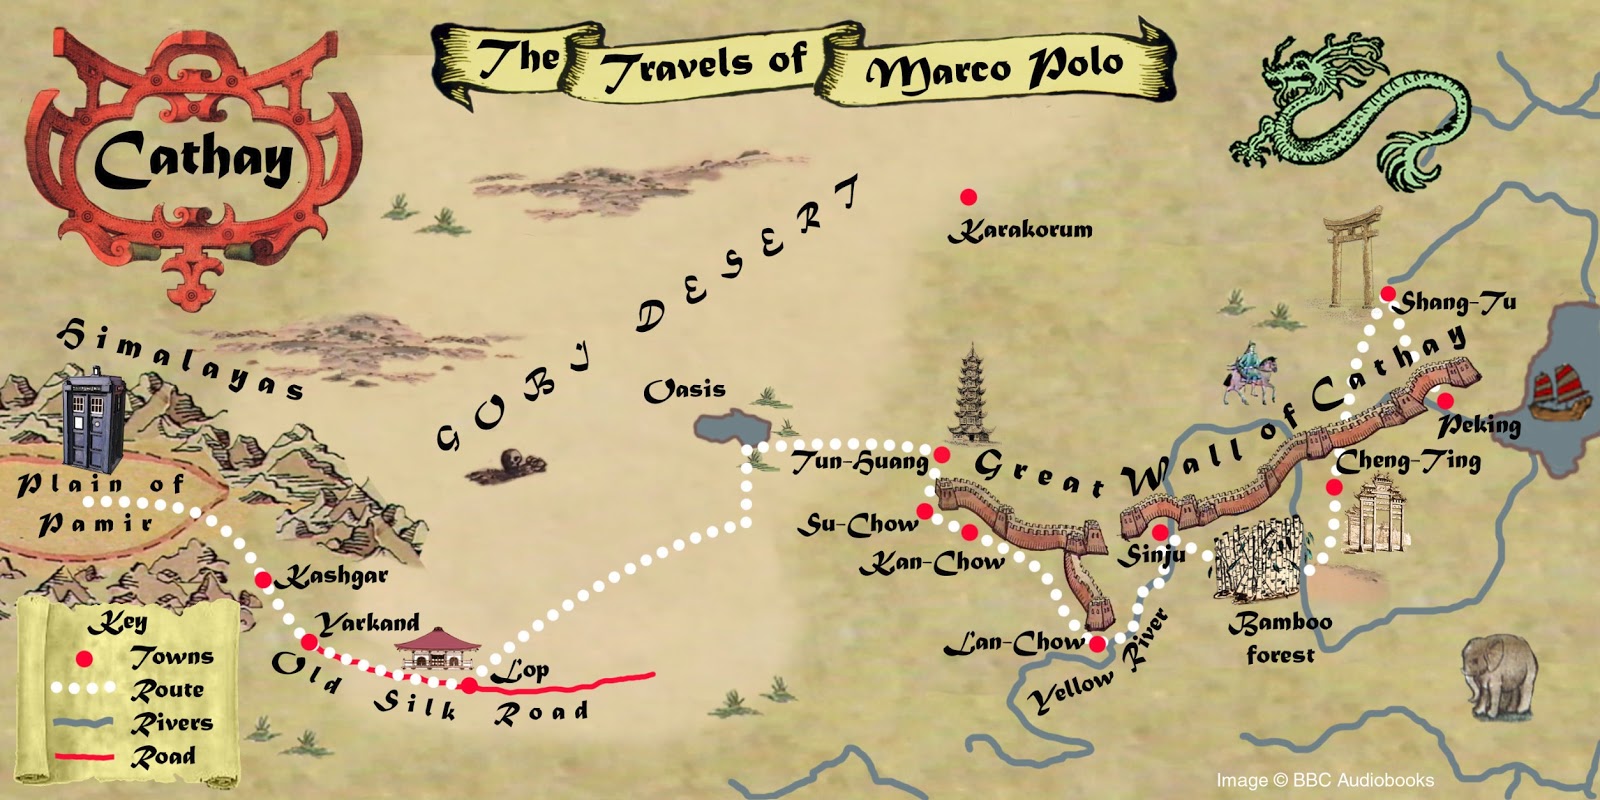 Doctor Who – Marco Polo Map